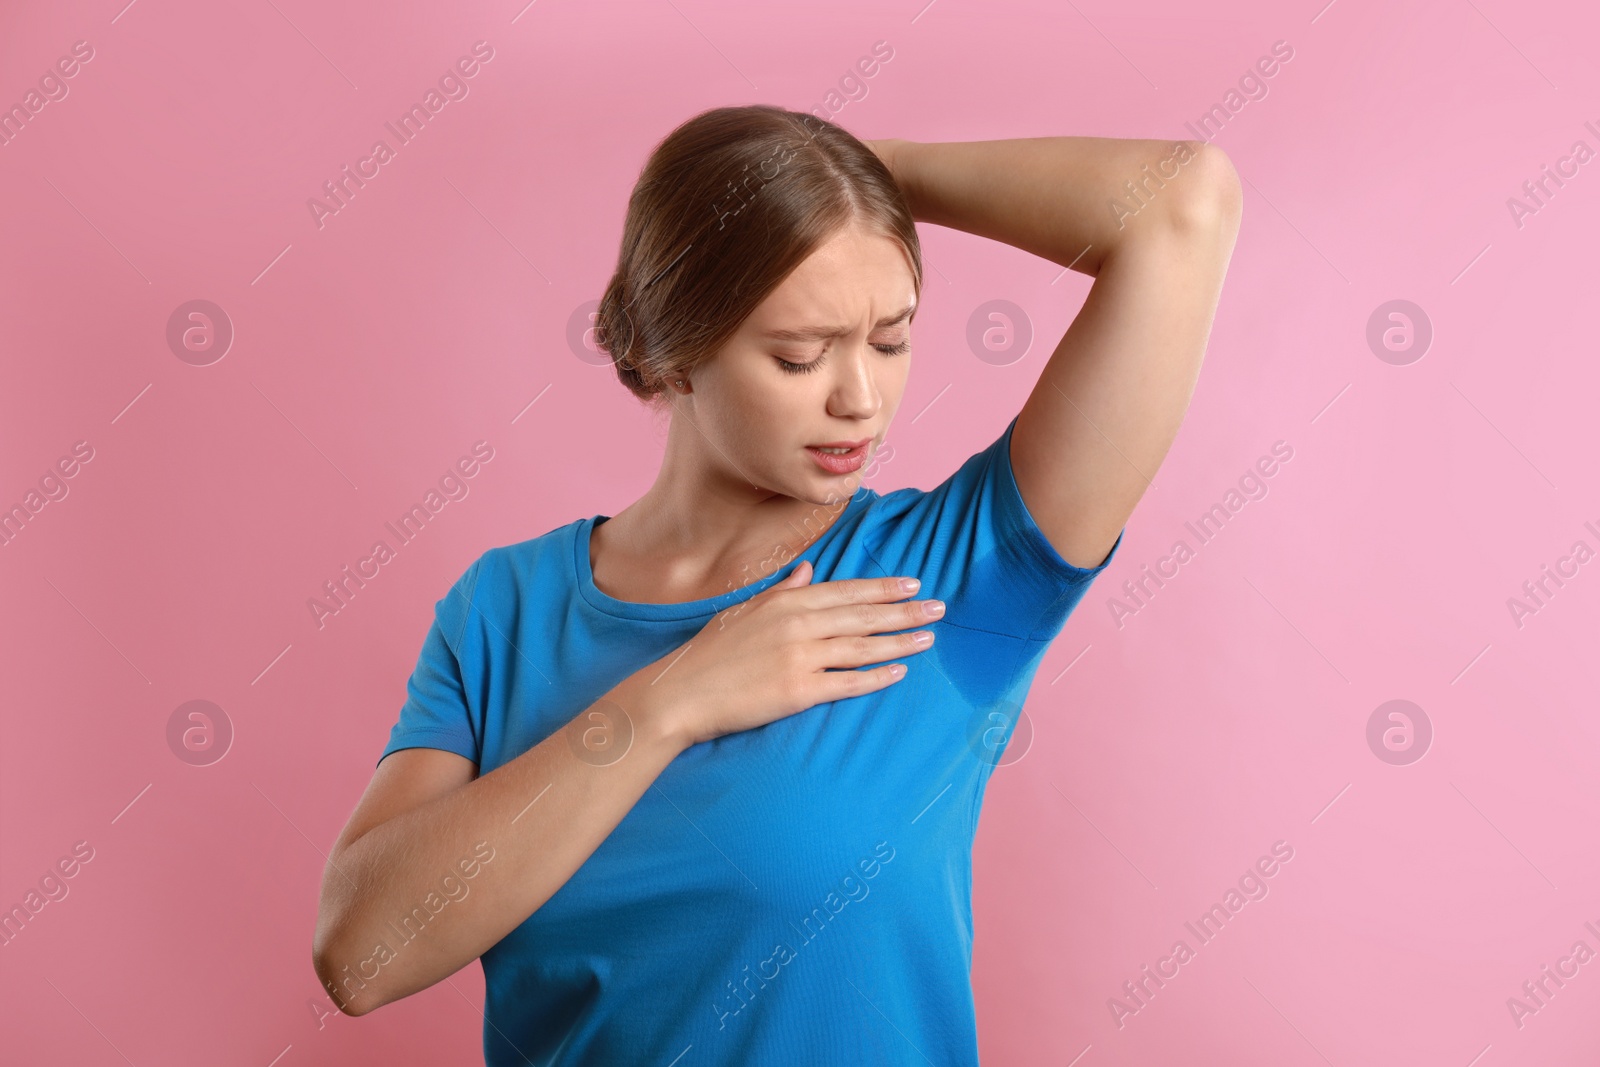 Photo of Young woman with sweat stain on her clothes against pink background. Using deodorant